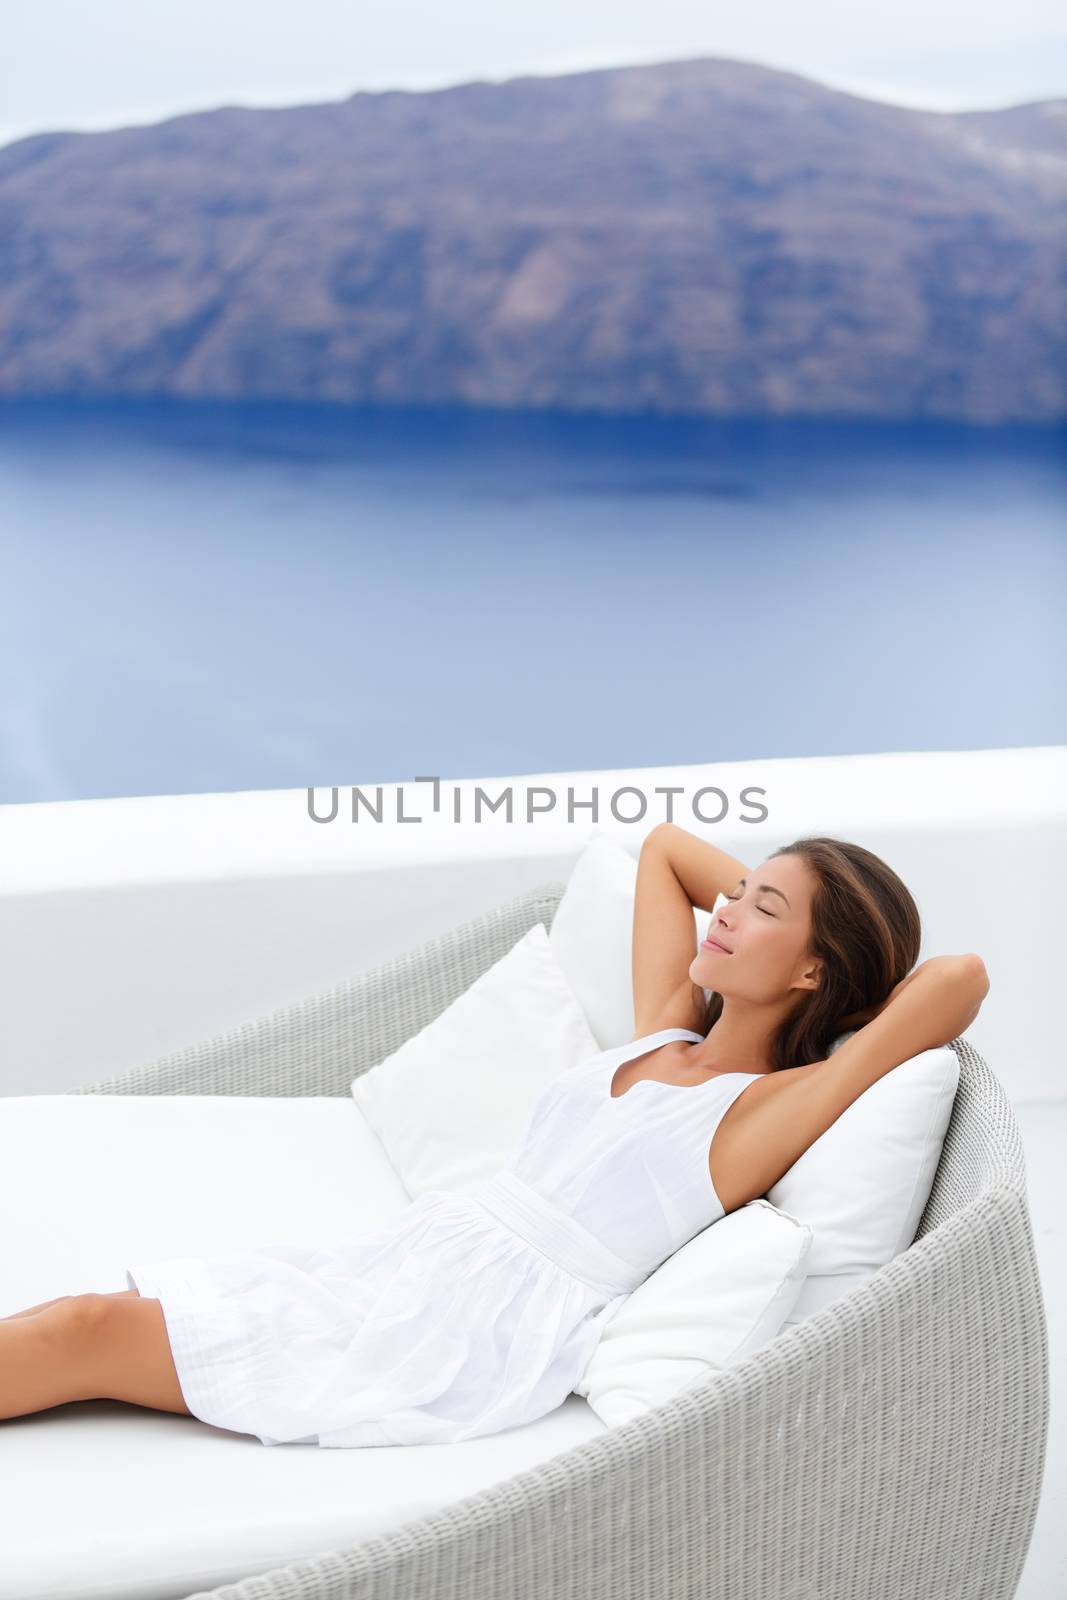 Woman Relaxing On Couch At Resort Terrace By Ocean by Maridav